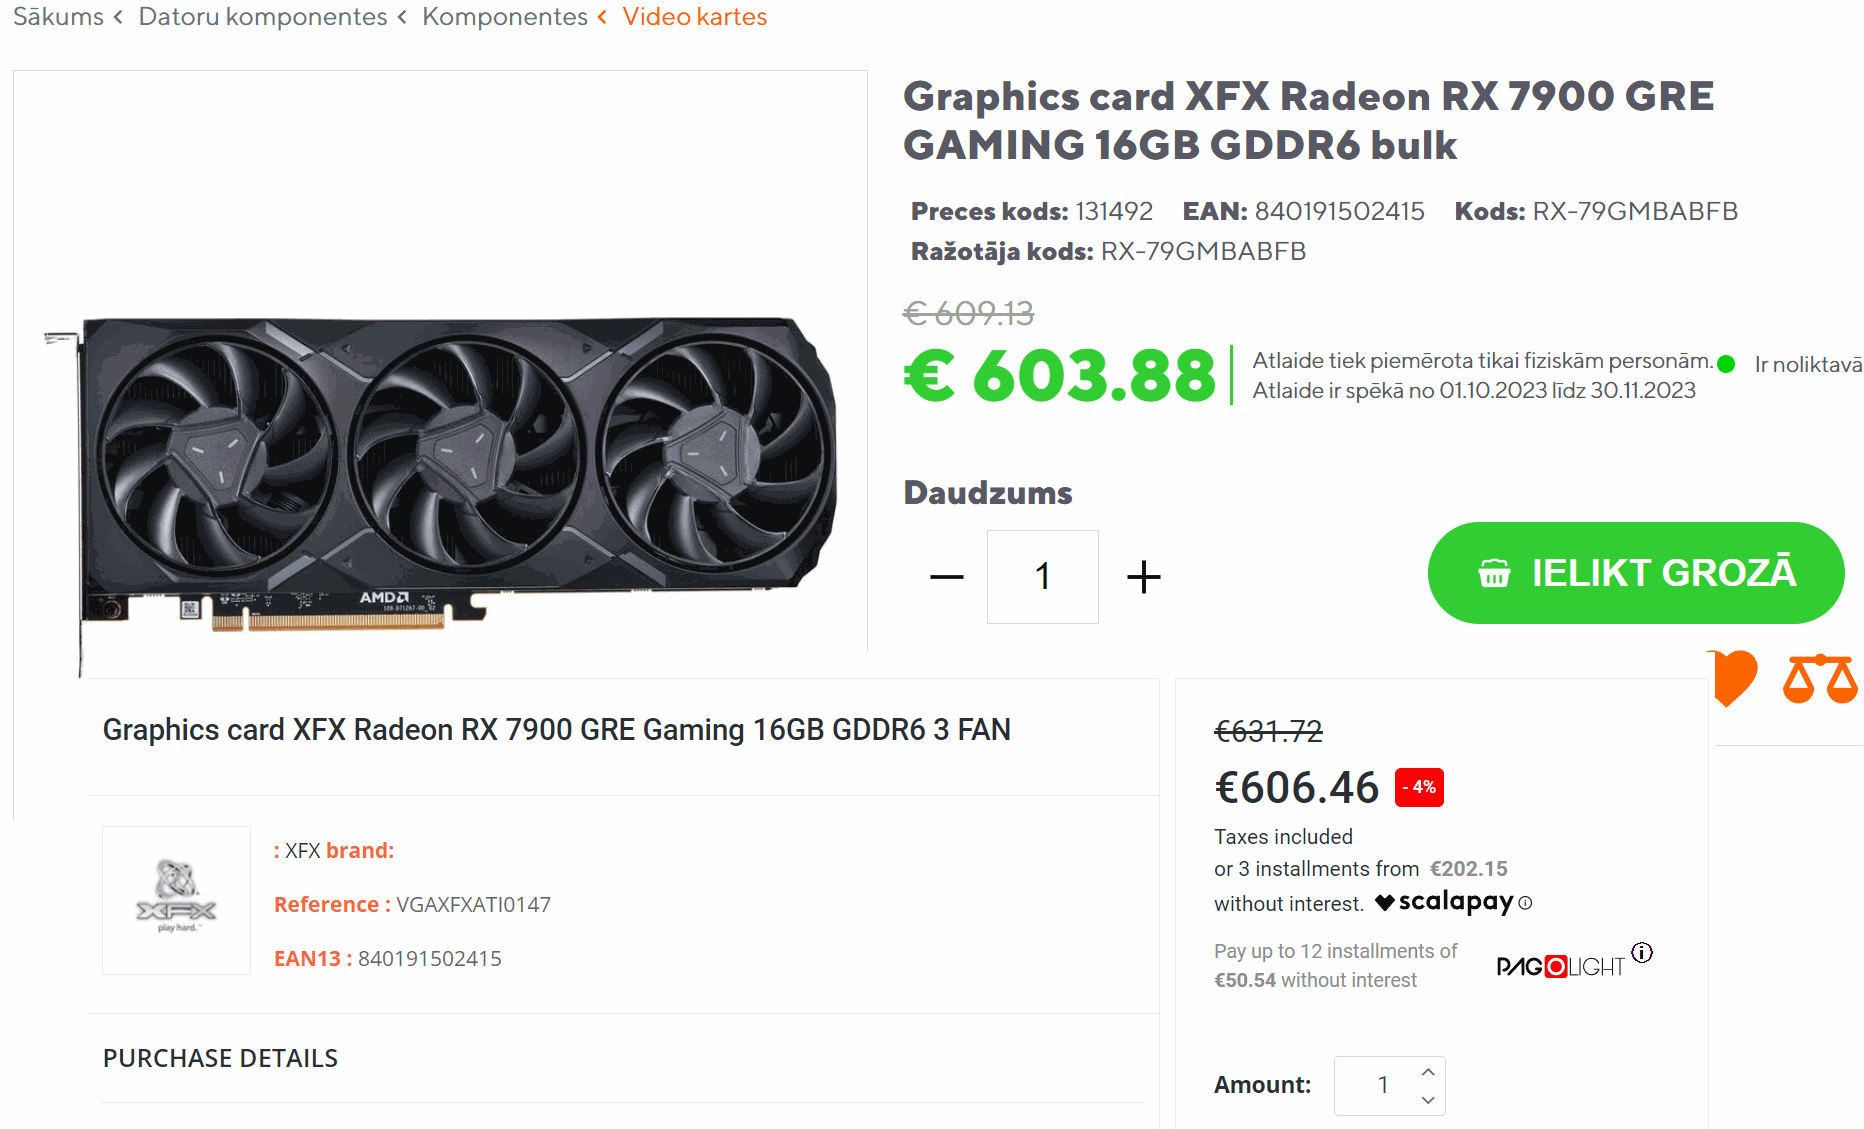 AMD Radeon RX 7900 GRE may soon hit a 600 EUR price in Europe